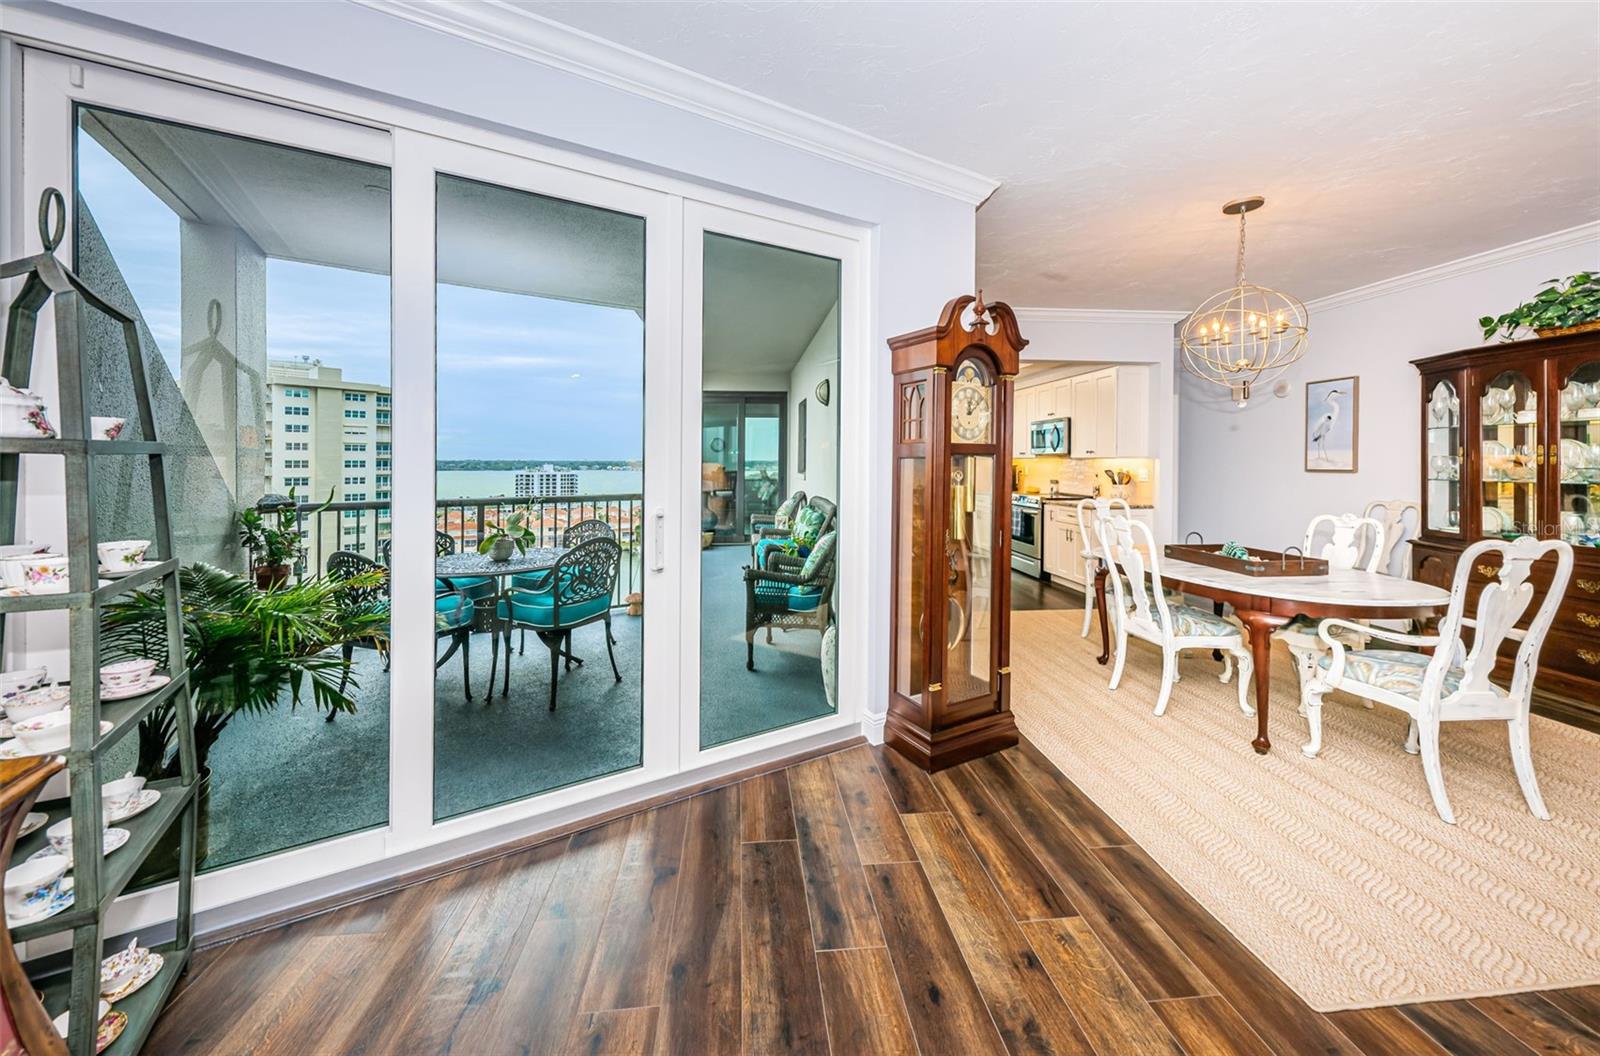 Exit the Living / Dining Areas to one of your large balcony's overlooking the Intracoastal Waterway!